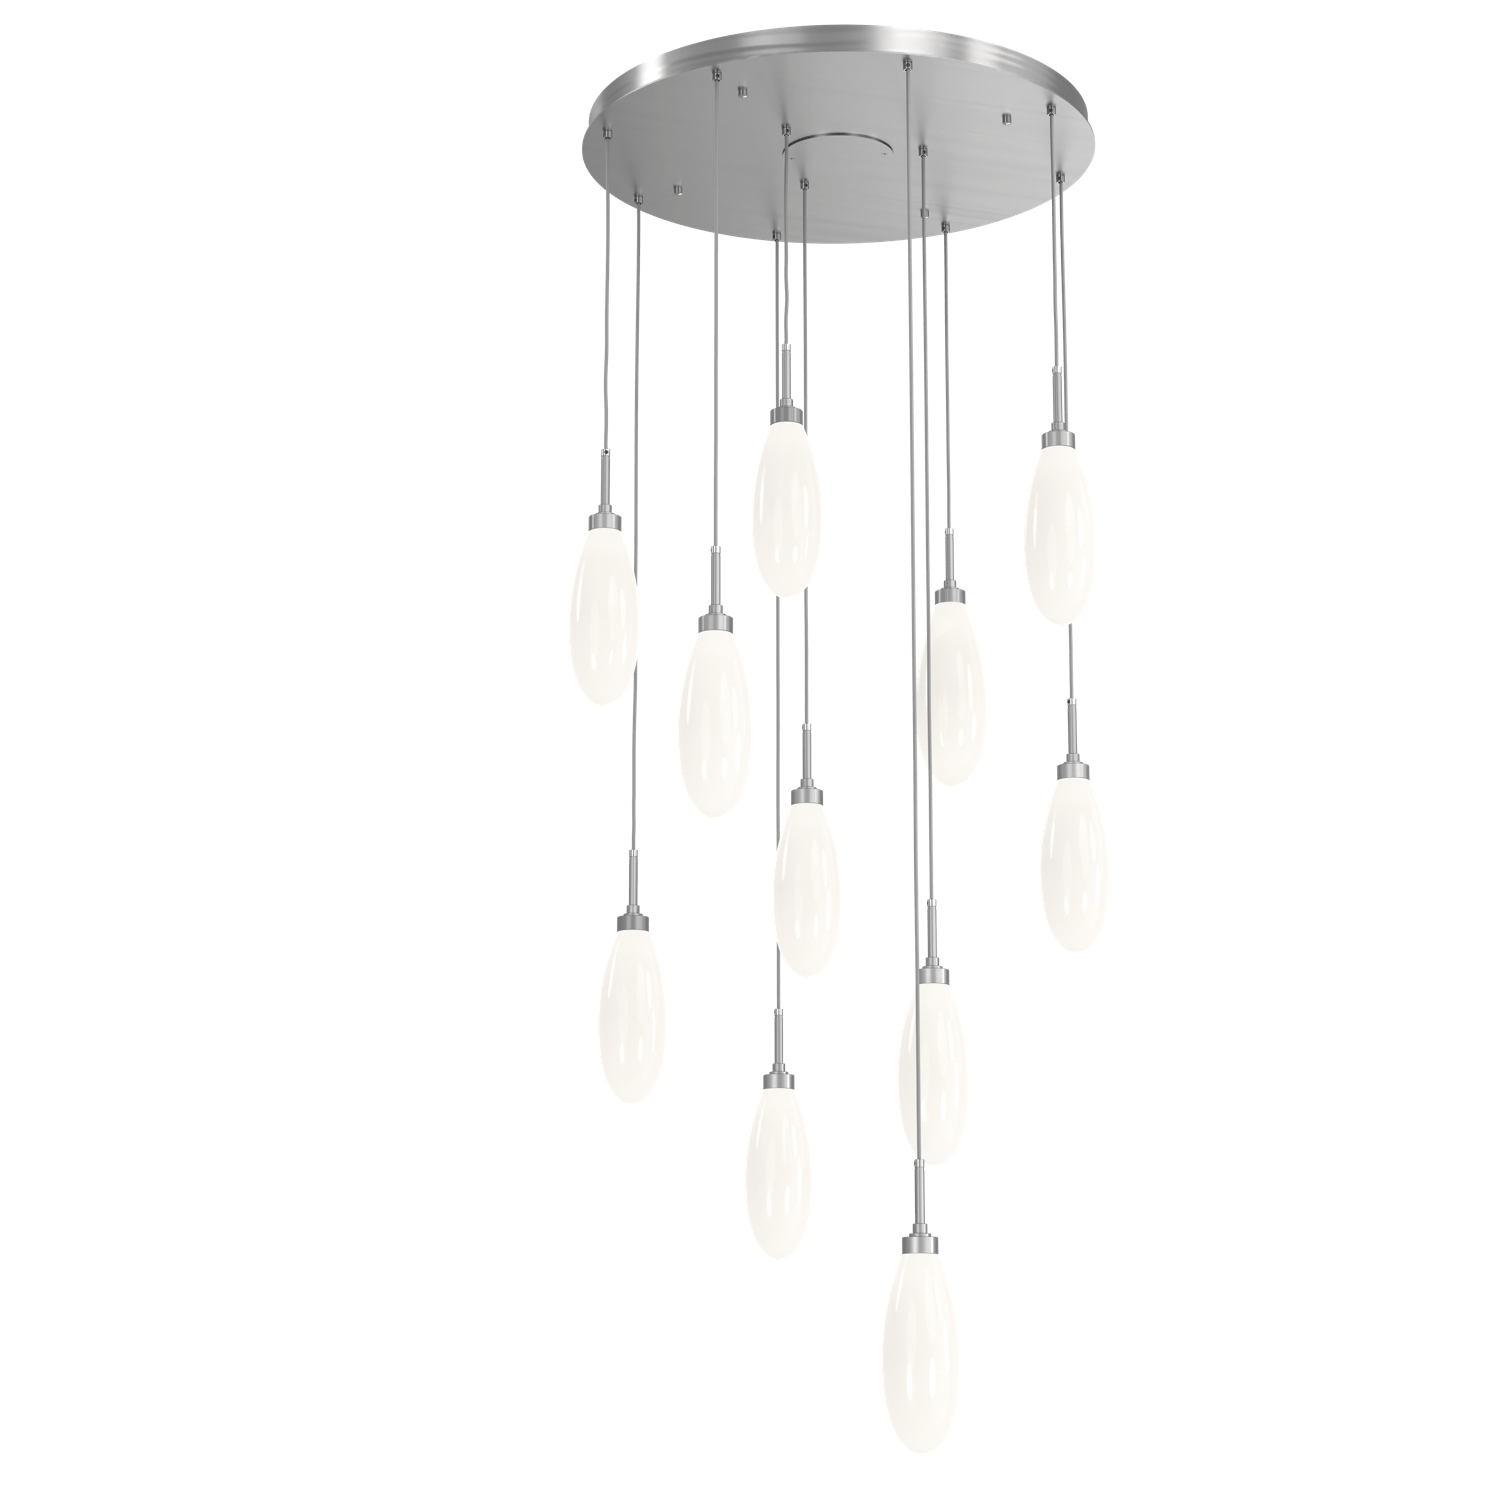 CHB0071-11-SN-WL-LL-Hammerton-Studio-Fiori-11-light-round-pendant-chandelier-with-satin-nickel-finish-and-opal-white-glass-shades-and-LED-lamping